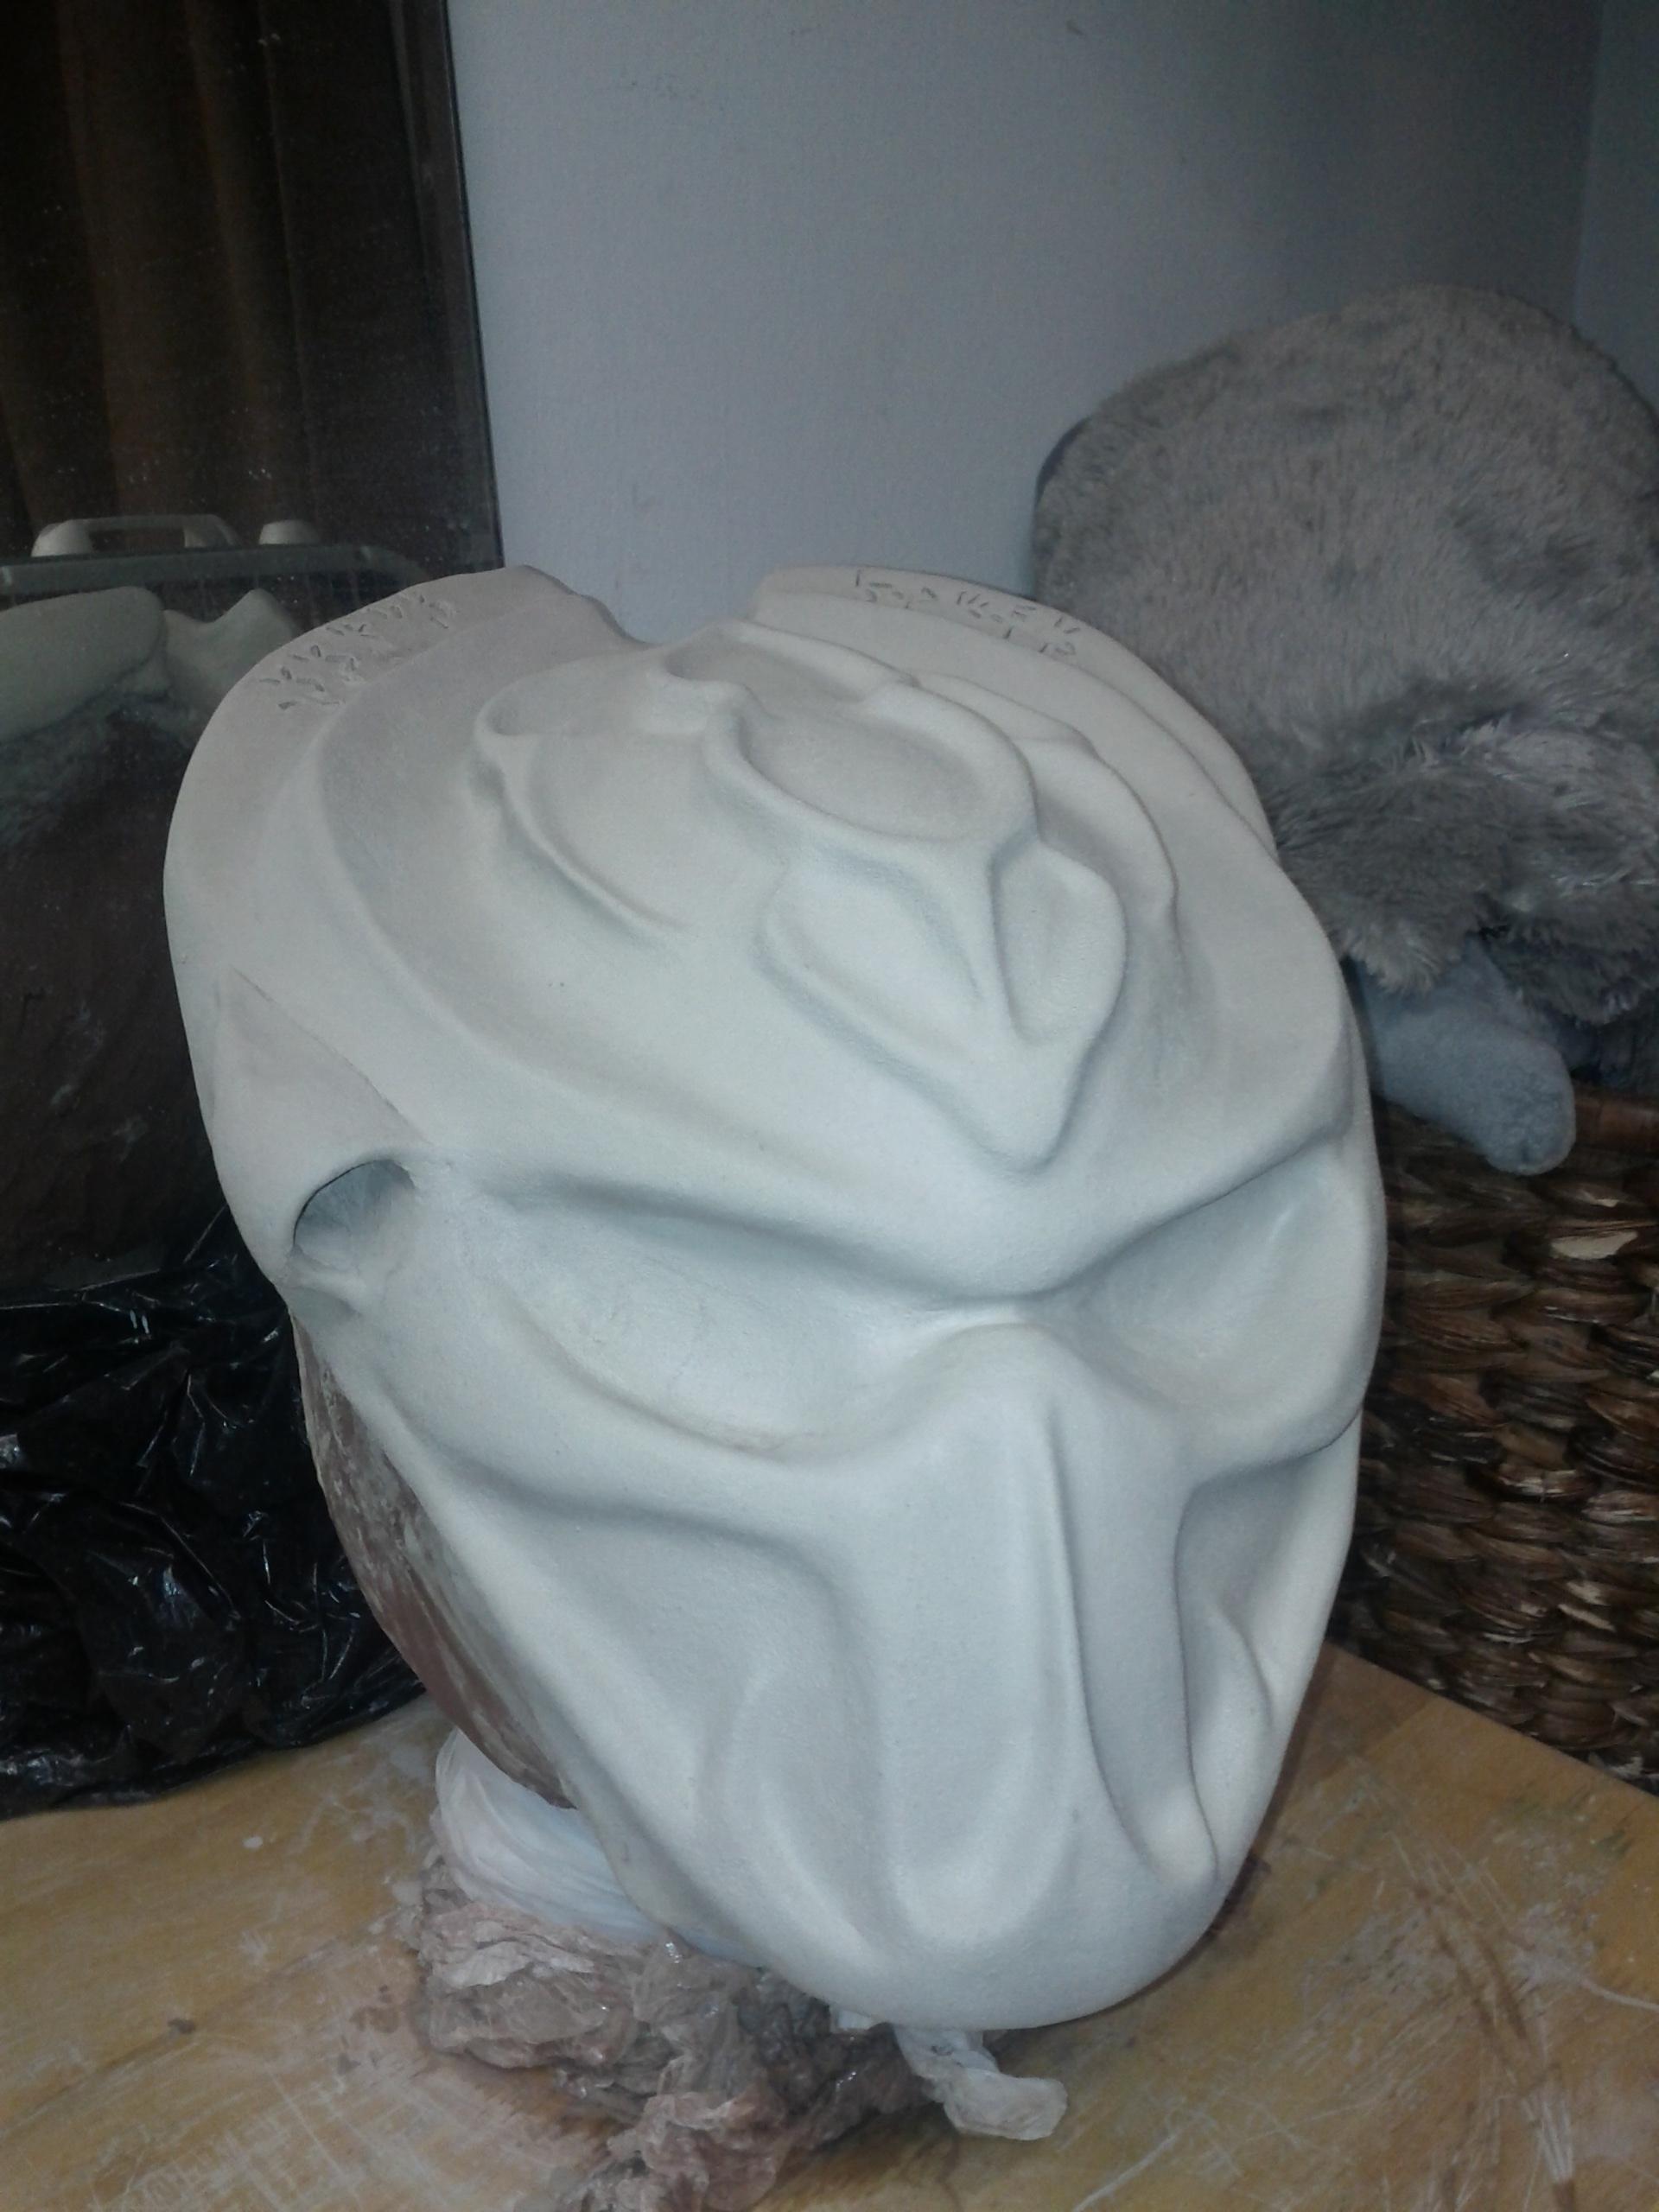 My First Helmet Her Name Is Larka Cinta Predator... Under mask is molded will be coming soon...yay